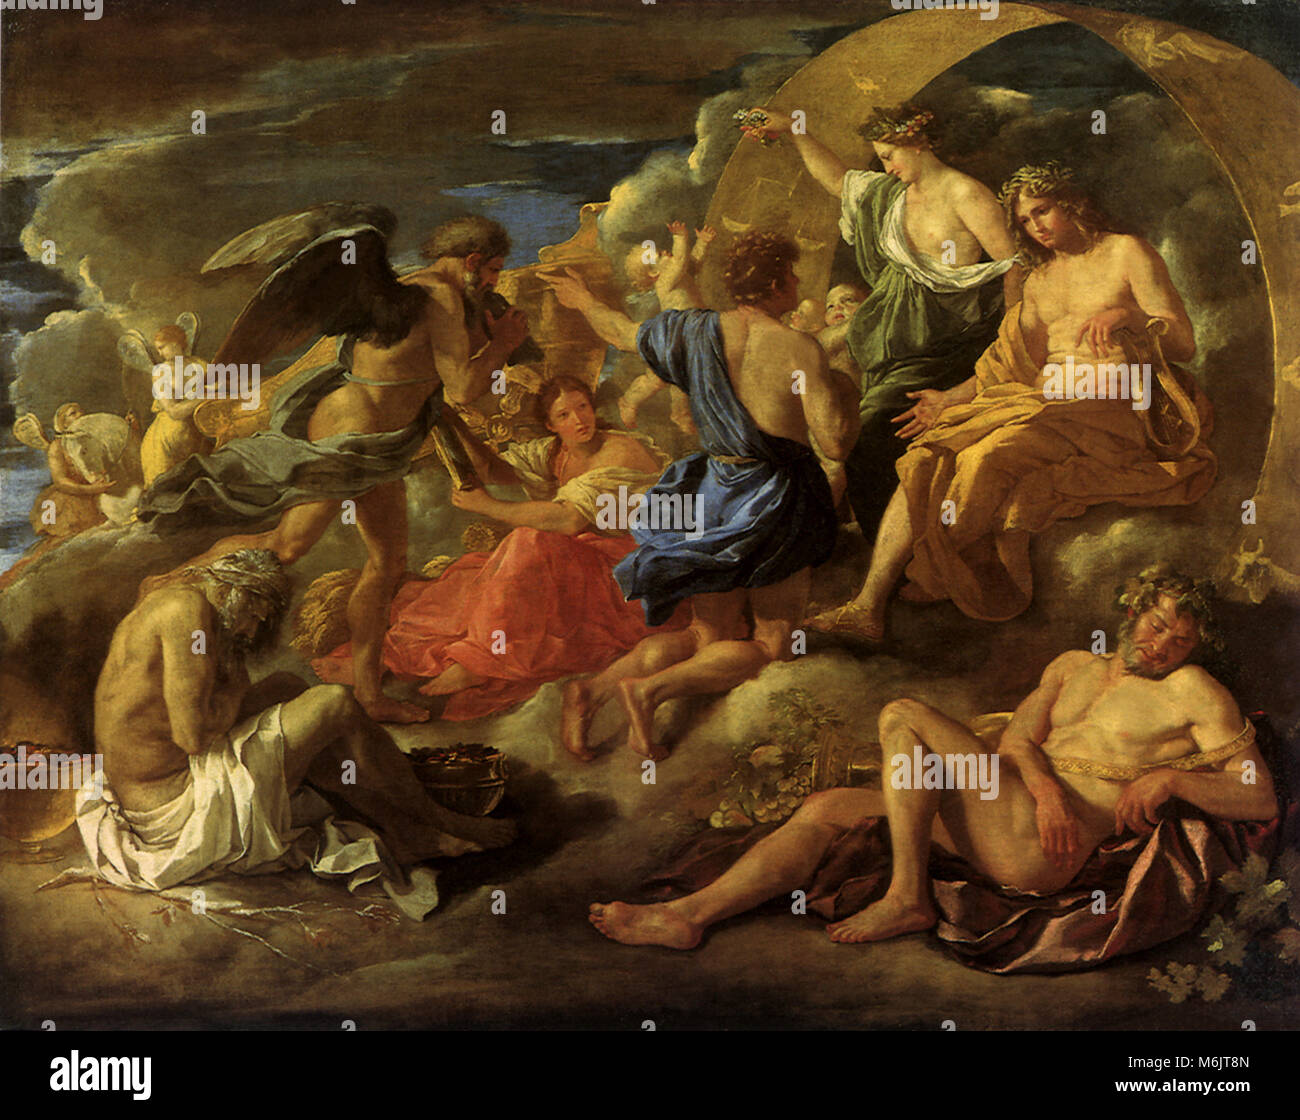 Helios and Phaeton with Saturn and the Four Seasons, Poussin, Nicolas, 1630. Stock Photo